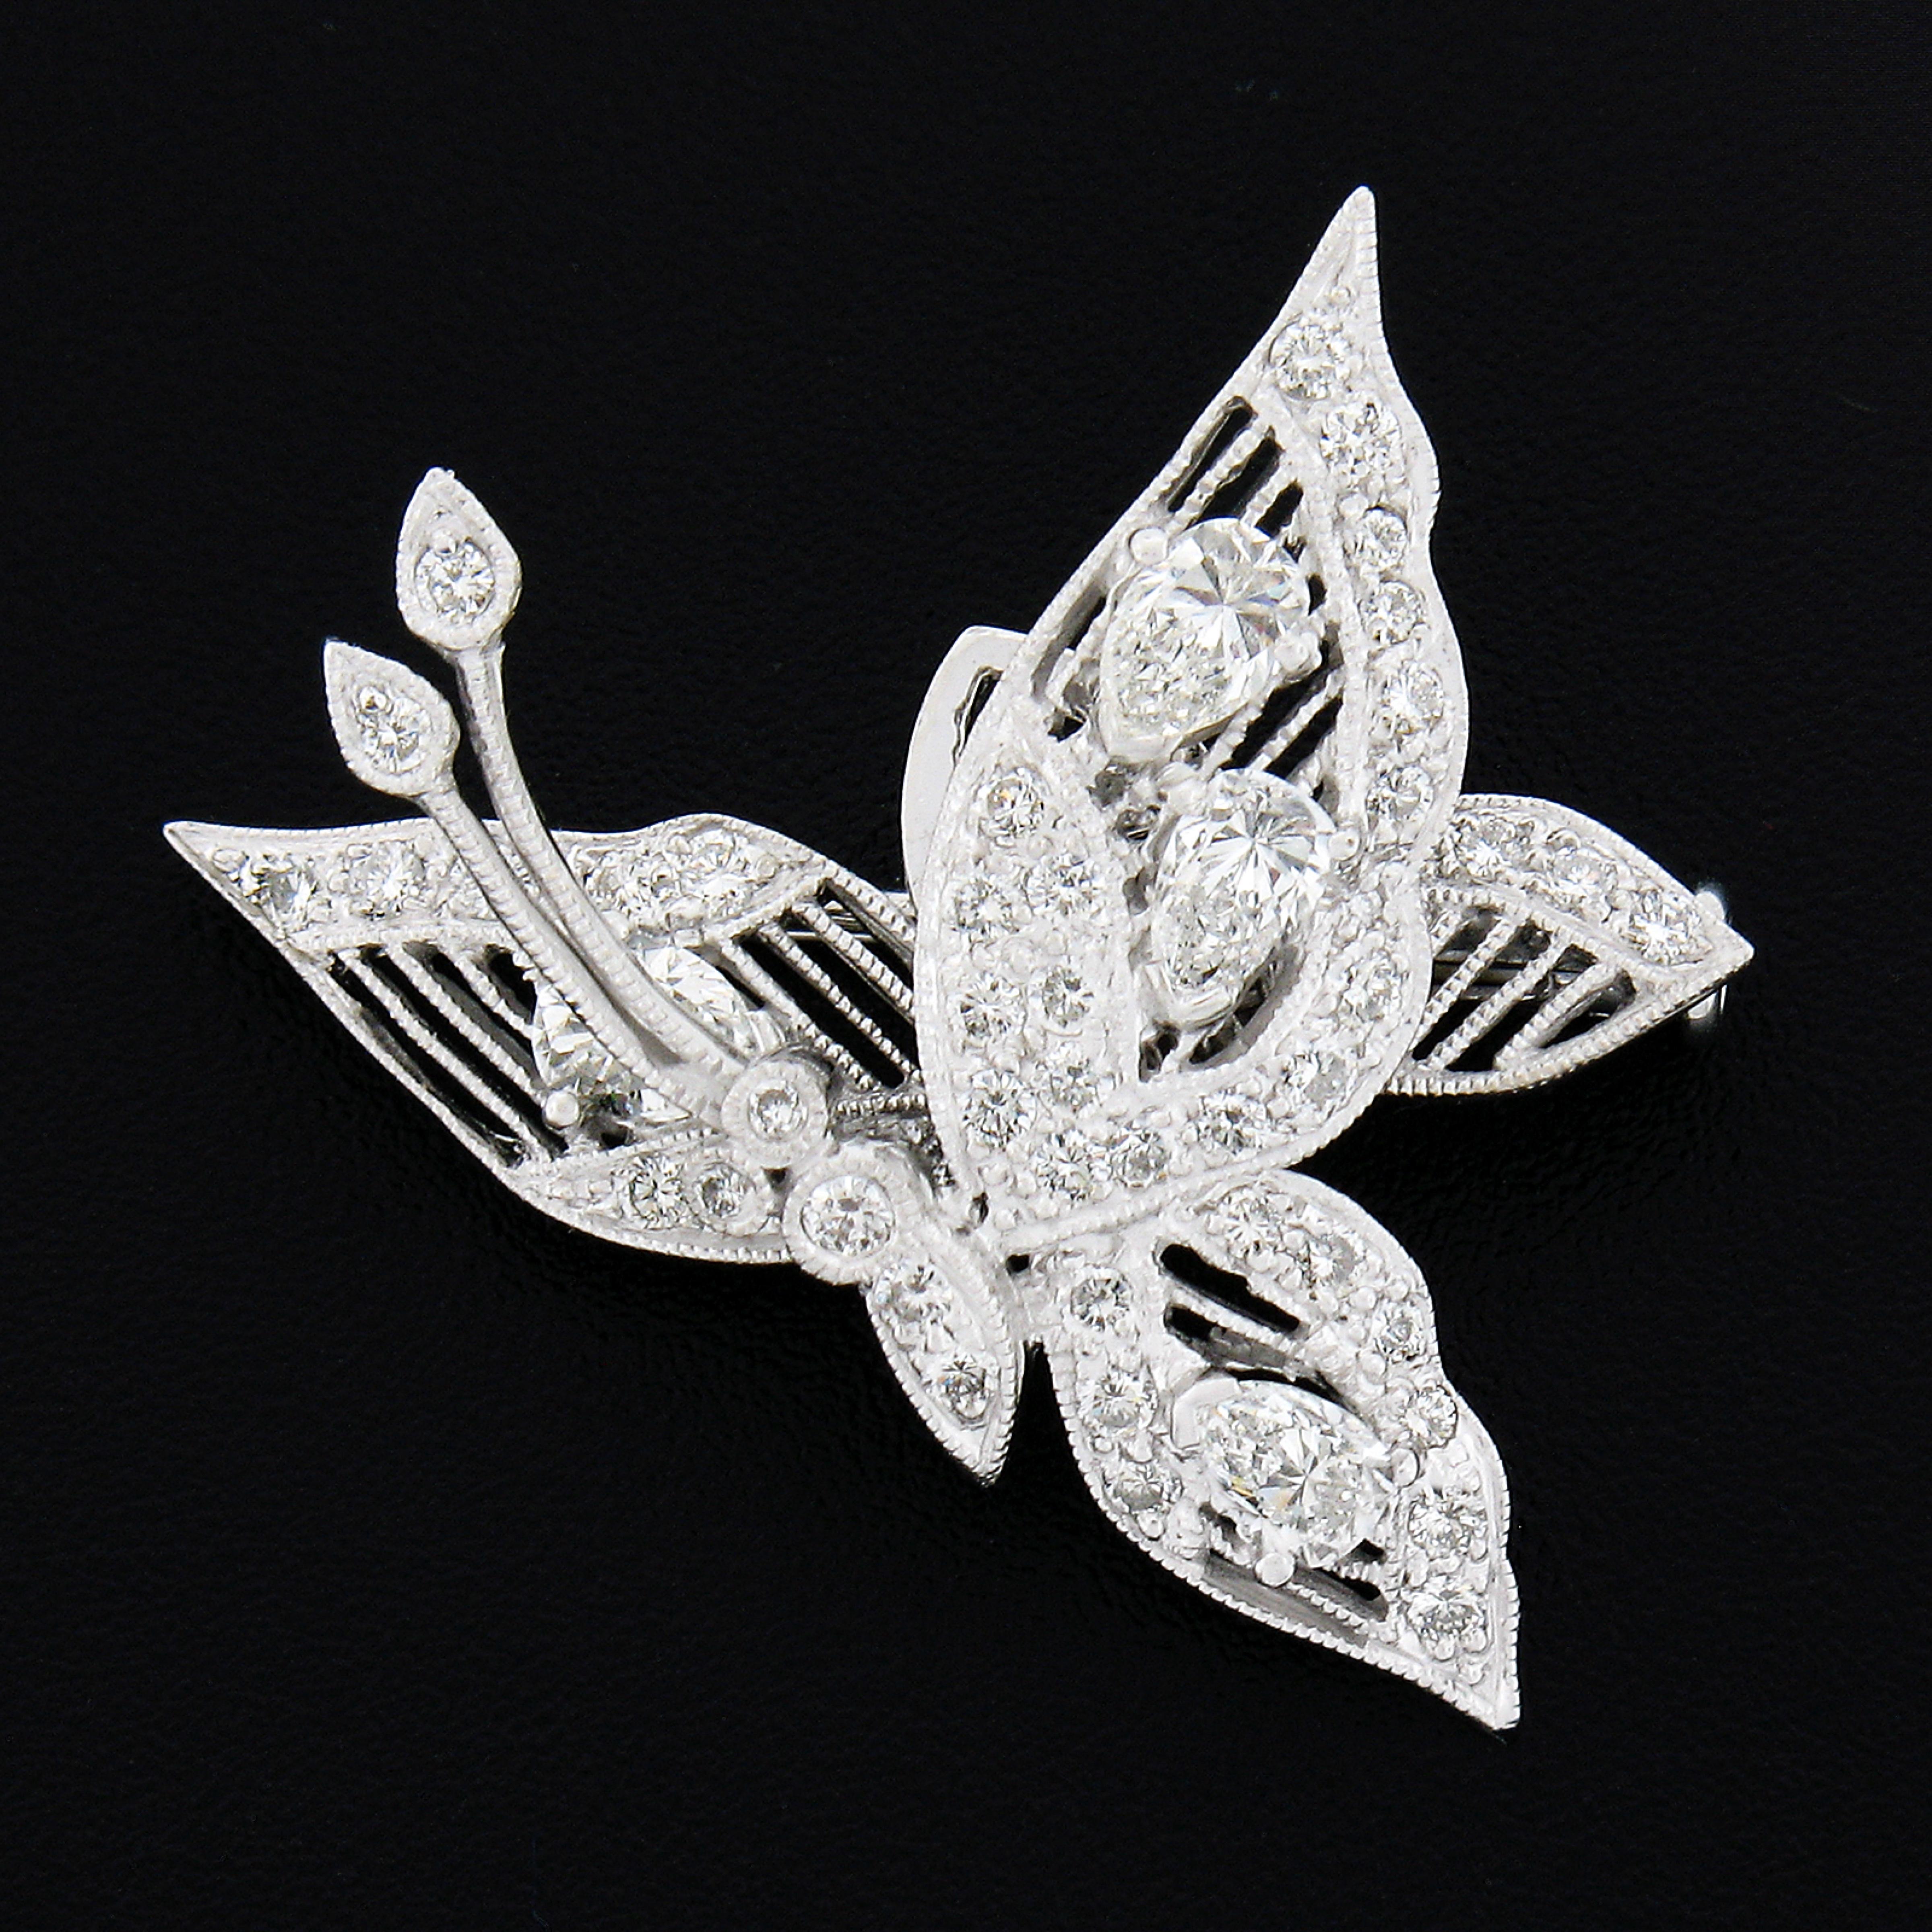 This gorgeous and elegant en Tremblant style pin brooch was beautifully designed and crafted from solid 18k white gold. The brooch features an amazingly detailed open work butterfly design adorned with delicate milgrain etching and is set with very